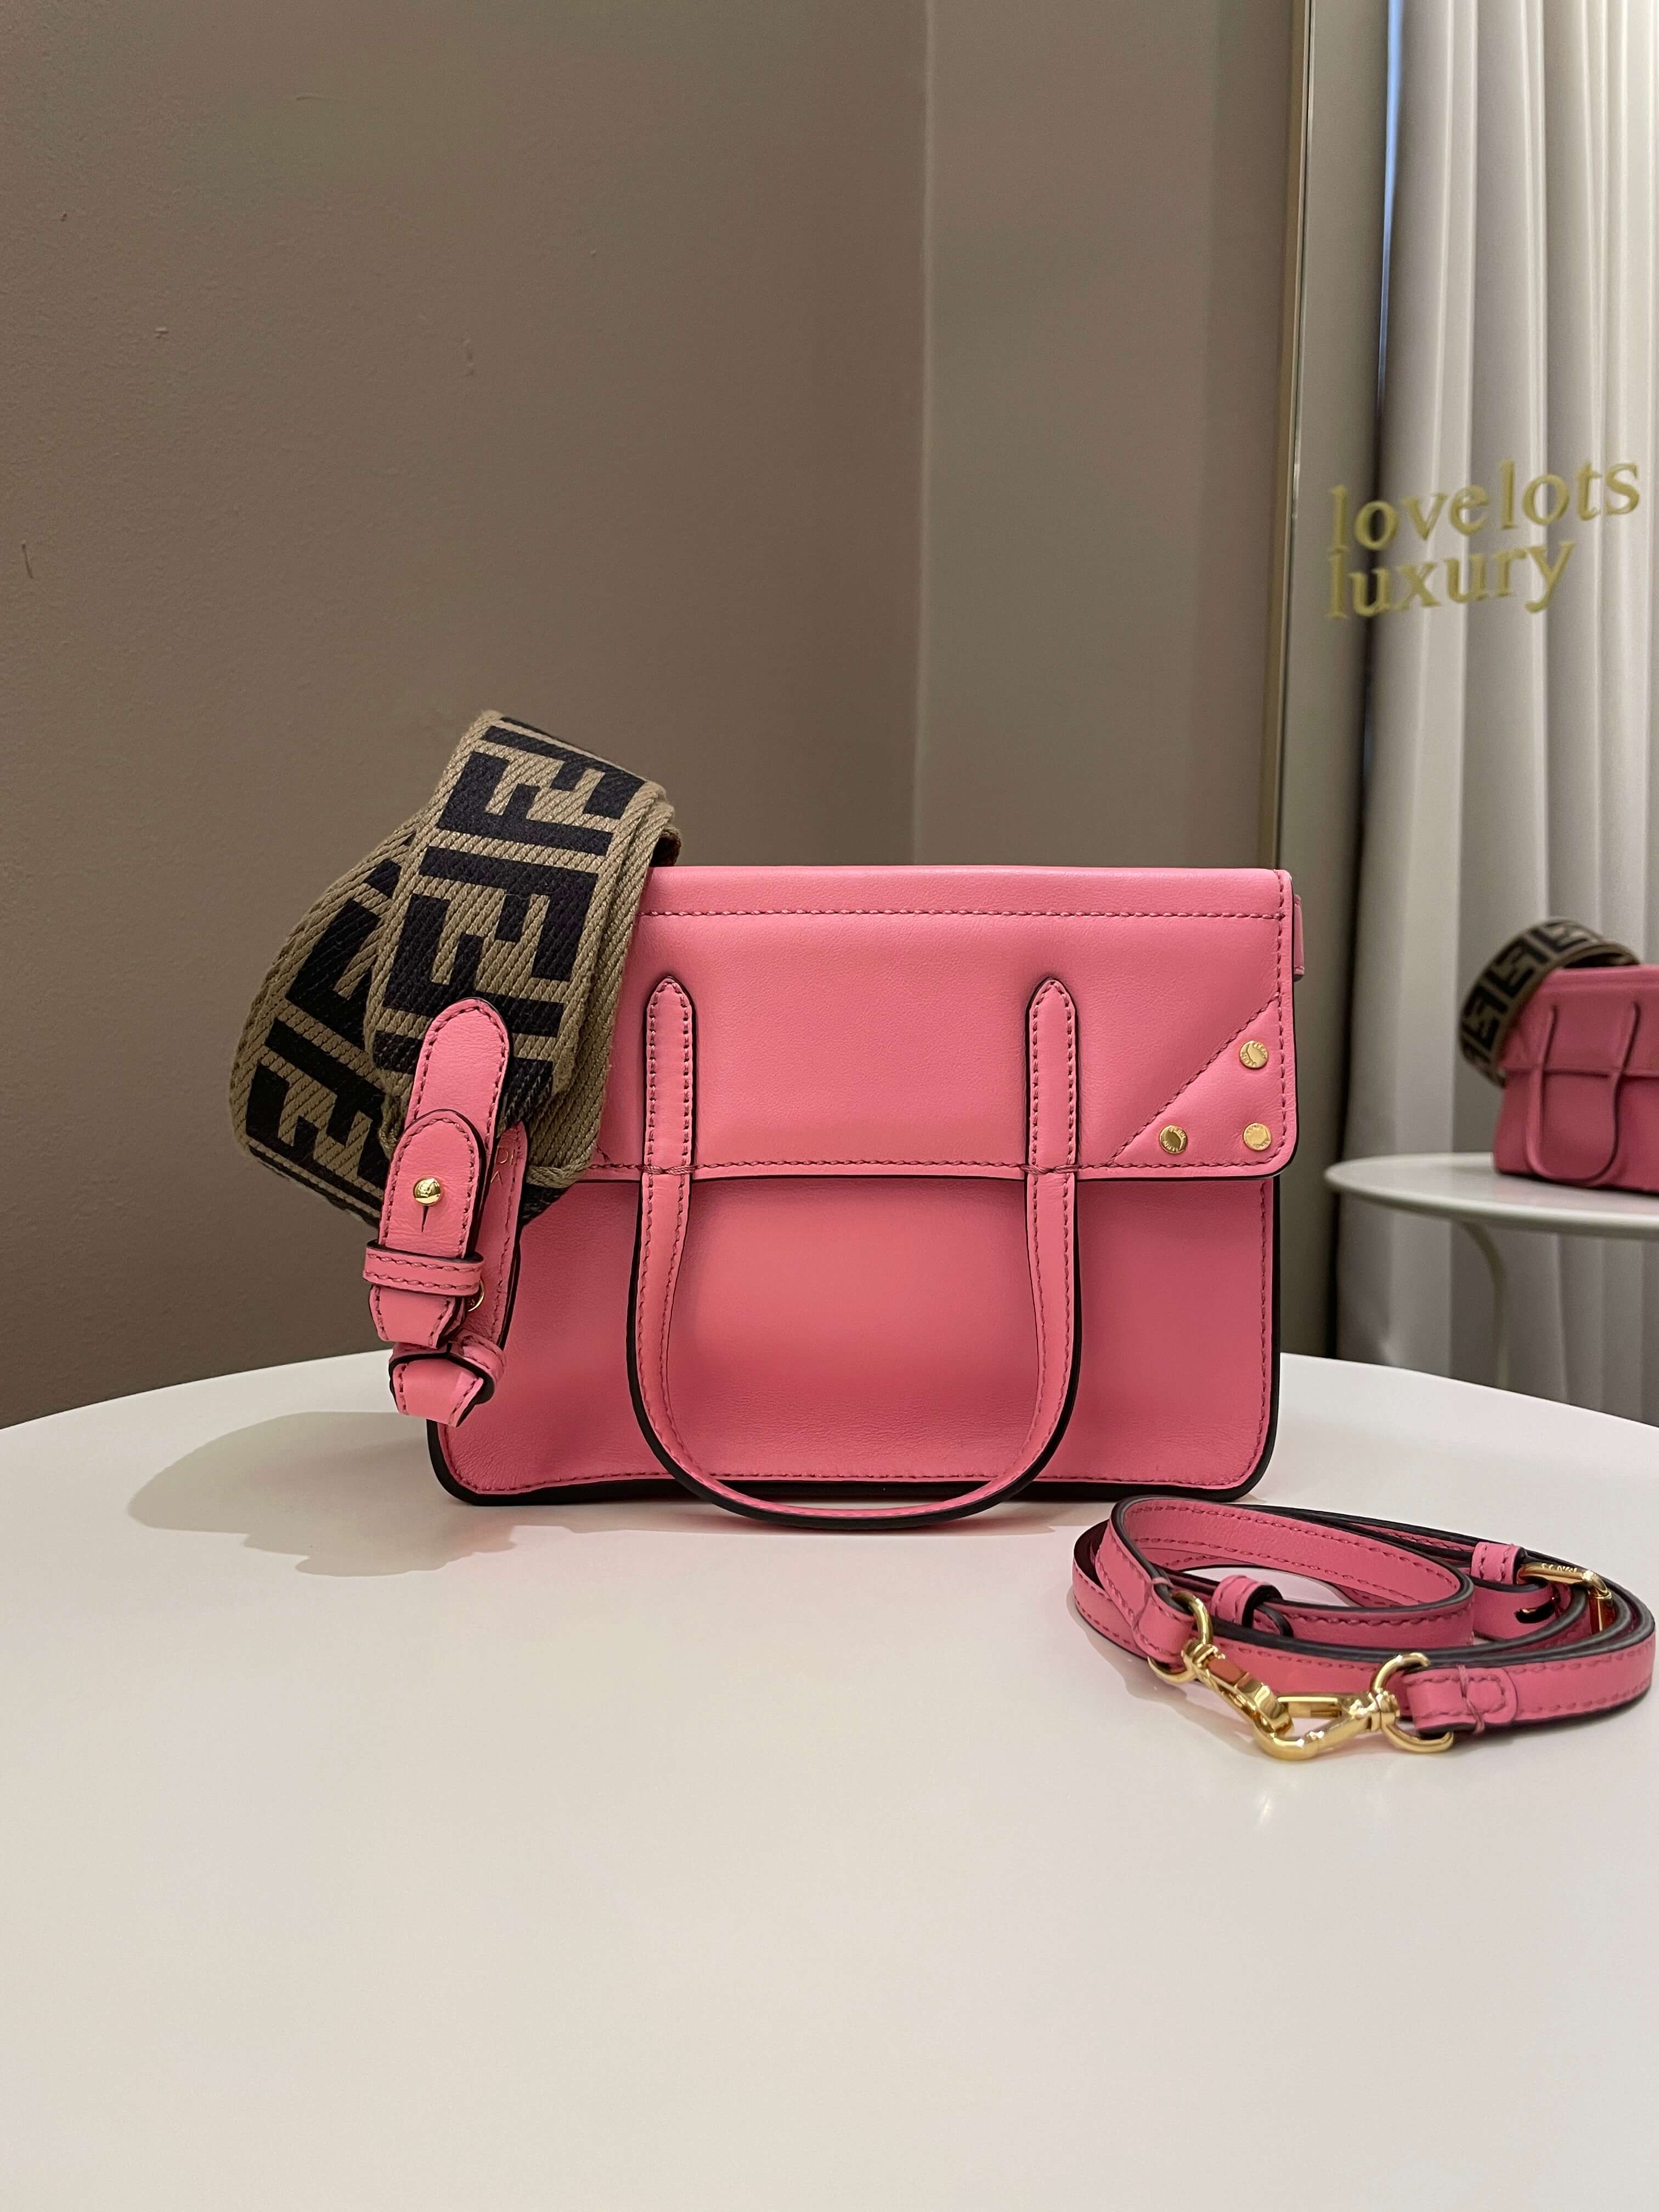 Fendi Baby Pink Leather Small Pack Pouch Crossbody Bag 💗💗💗 Fendi 2020  limited edition runway soft pink leather small pack pouch crossbody… |  Instagram